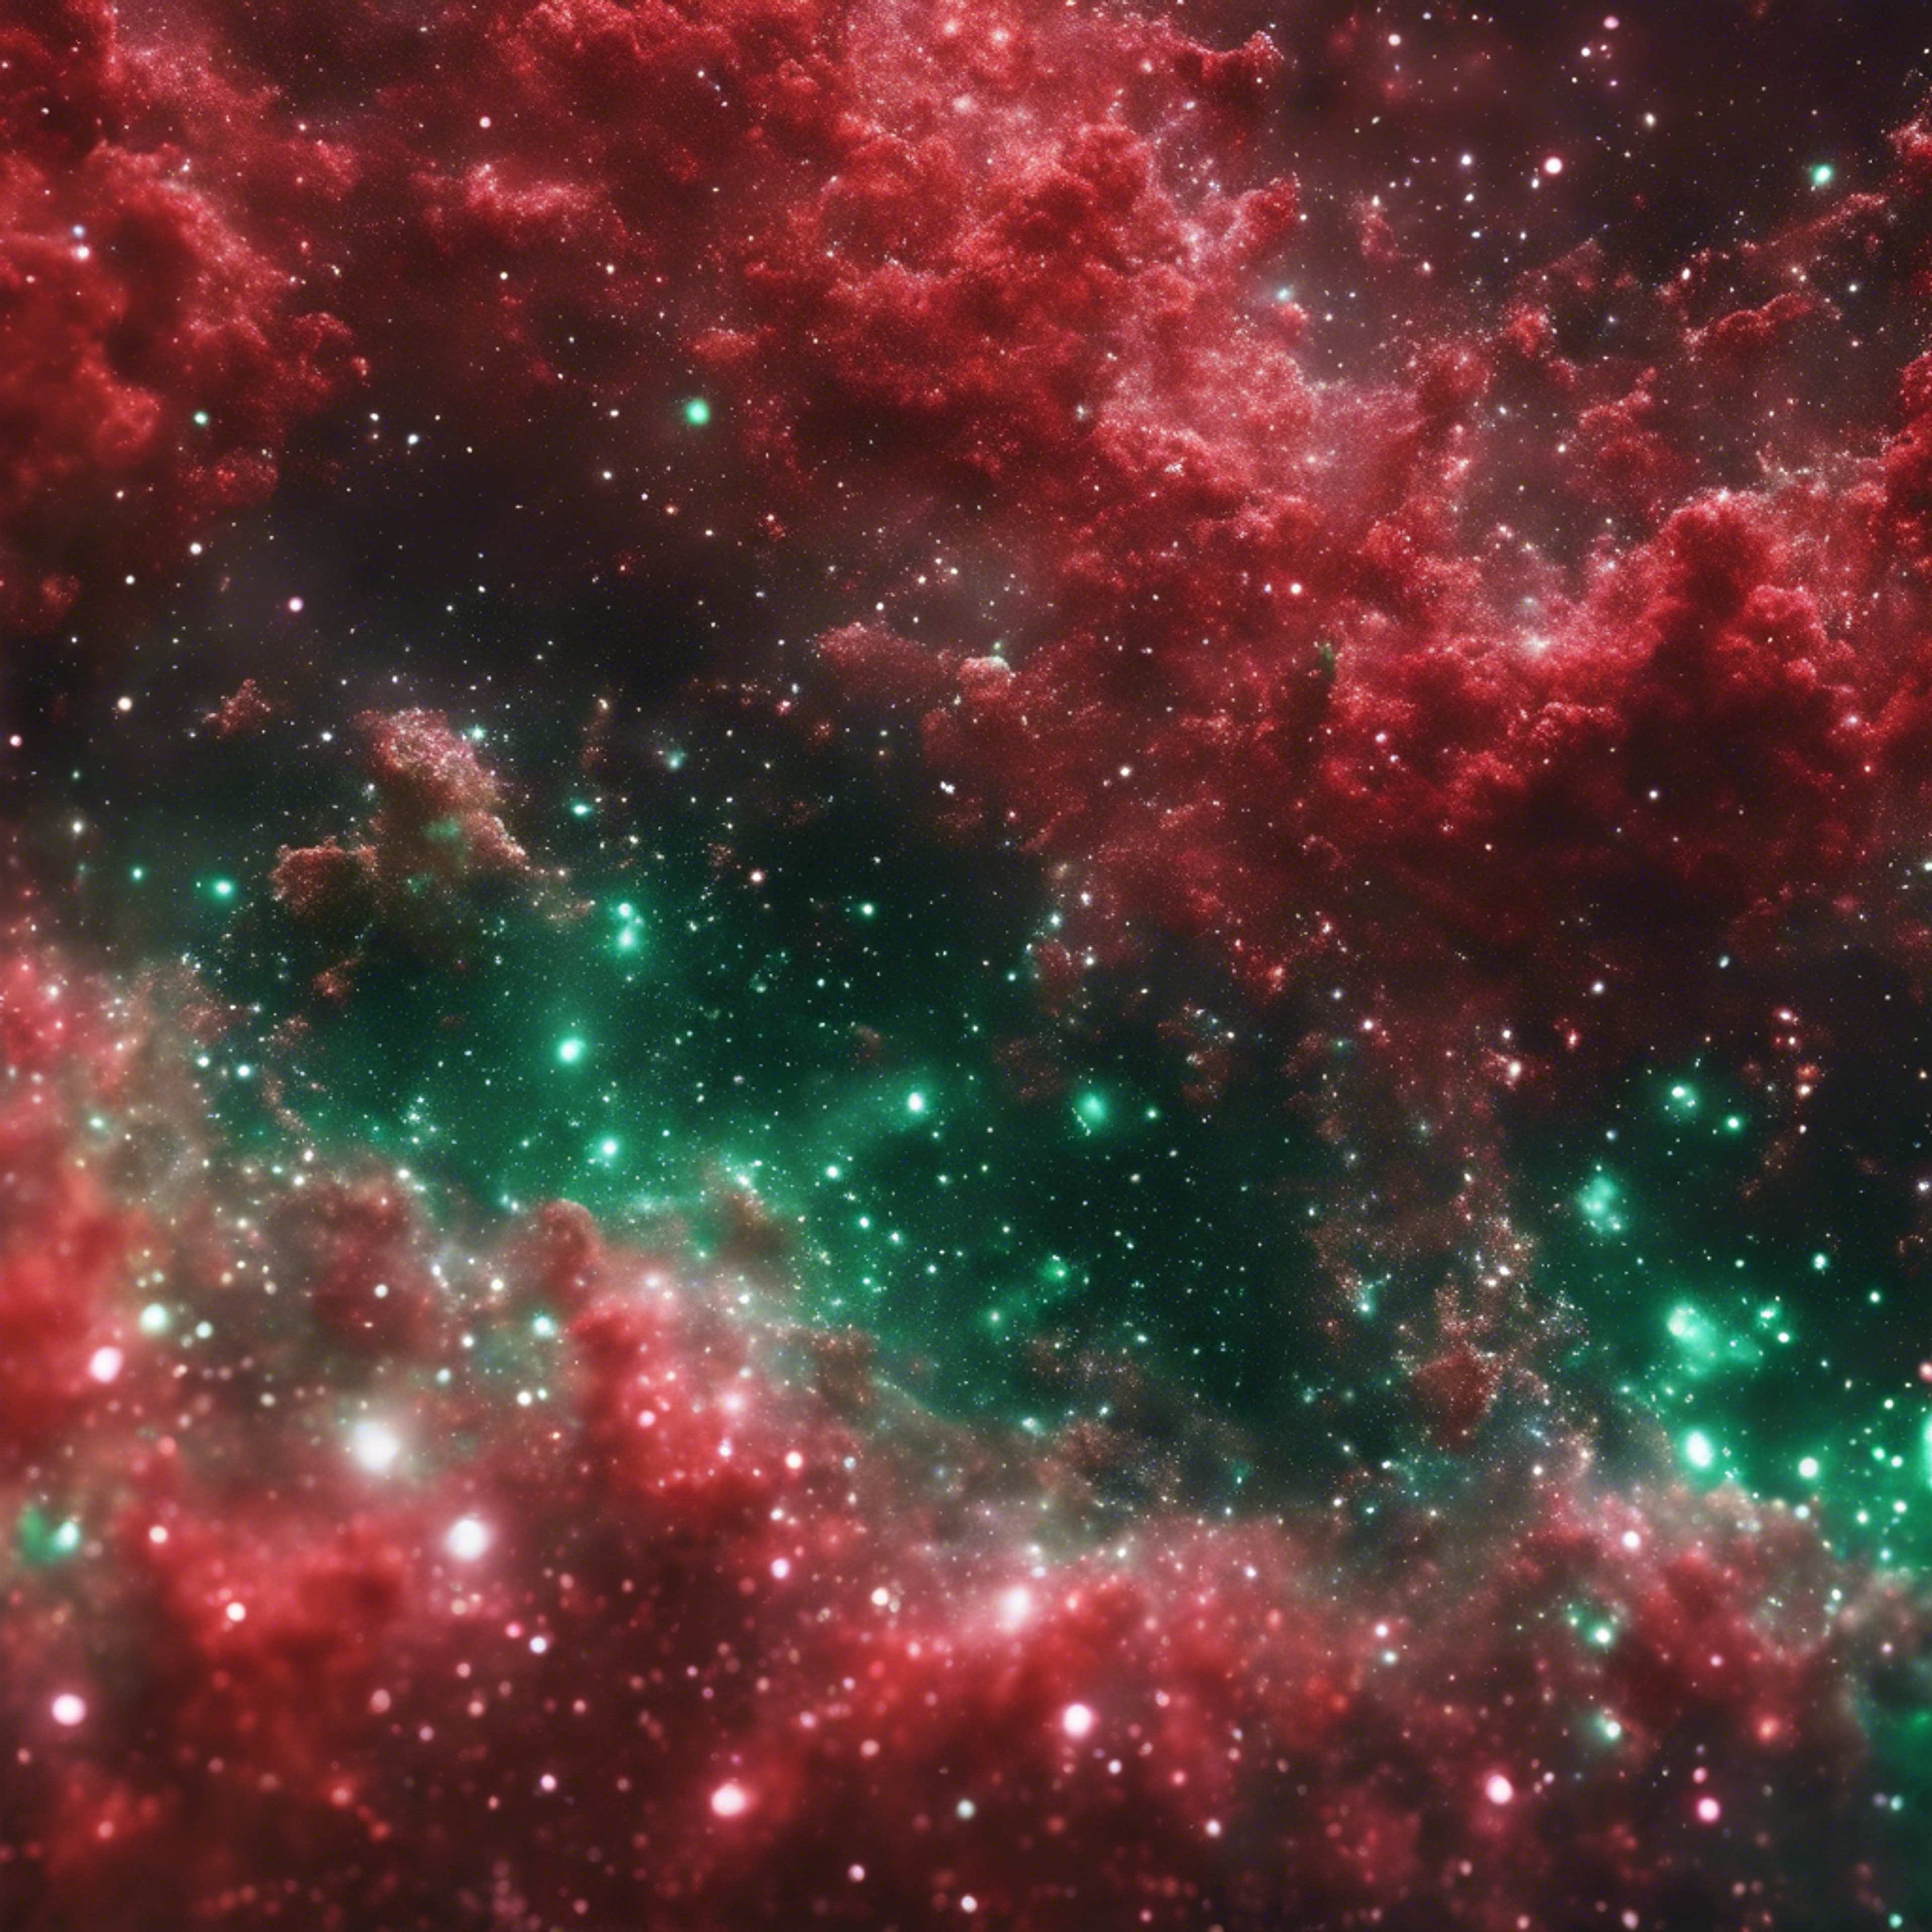 Red and green glitter spread like a nebula in space壁紙[56bea9c0023d4b1f9afc]